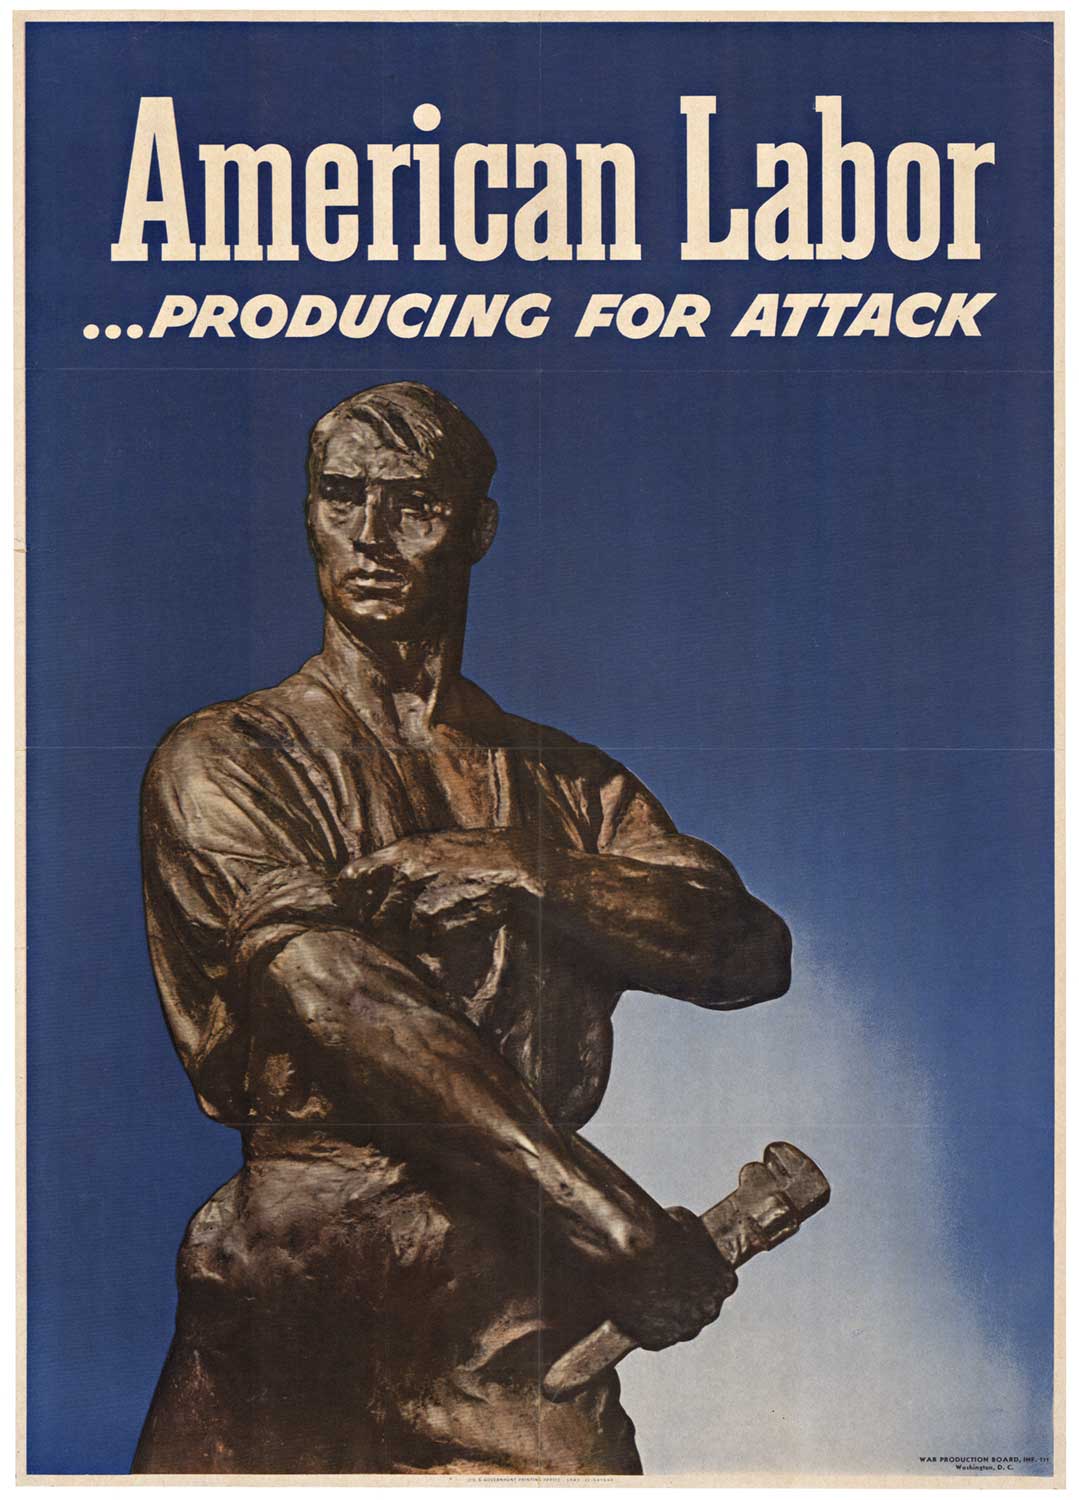 AMERICAN LABOR - PRODUCING ORIGINAL VINTAGE WWII POSTER. Year: 1943. Size: 19.5" x 22.25. Professional archival linen backed; ready to frame. <br> <br>Original. Lithograph. Produced by the US Government Printing Office, O-541688. Through War Prod